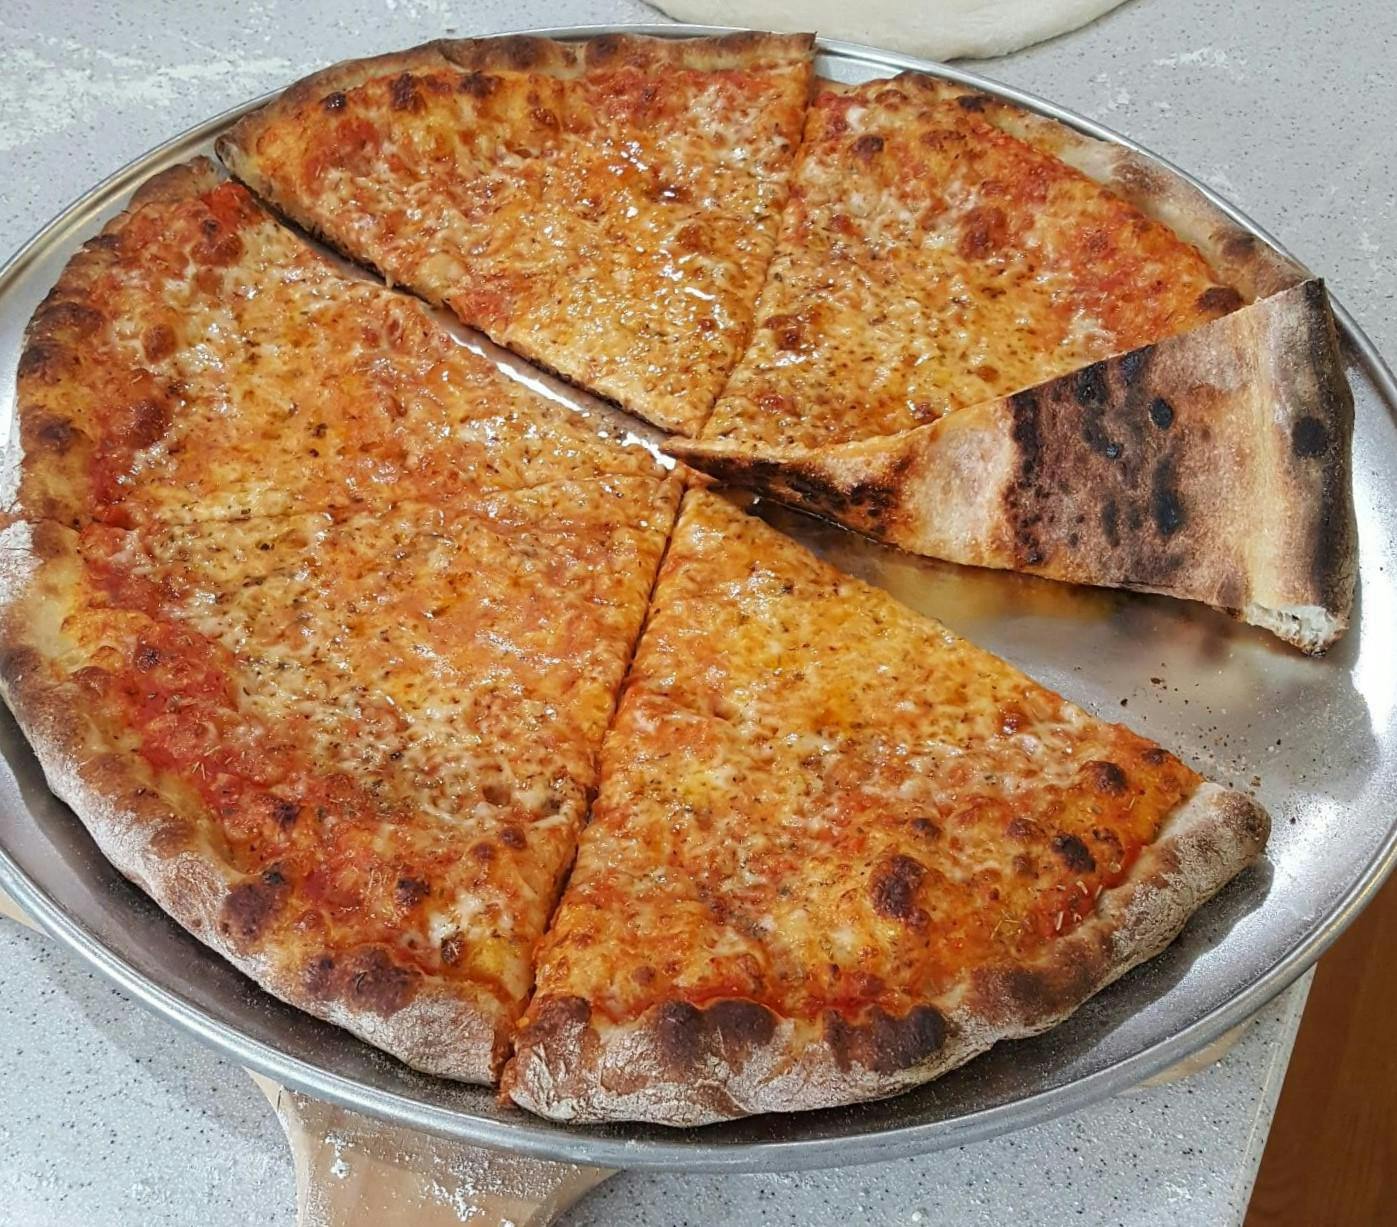 18" XX Large from Jo Jo's New York Style Pizza in Hollywood, FL